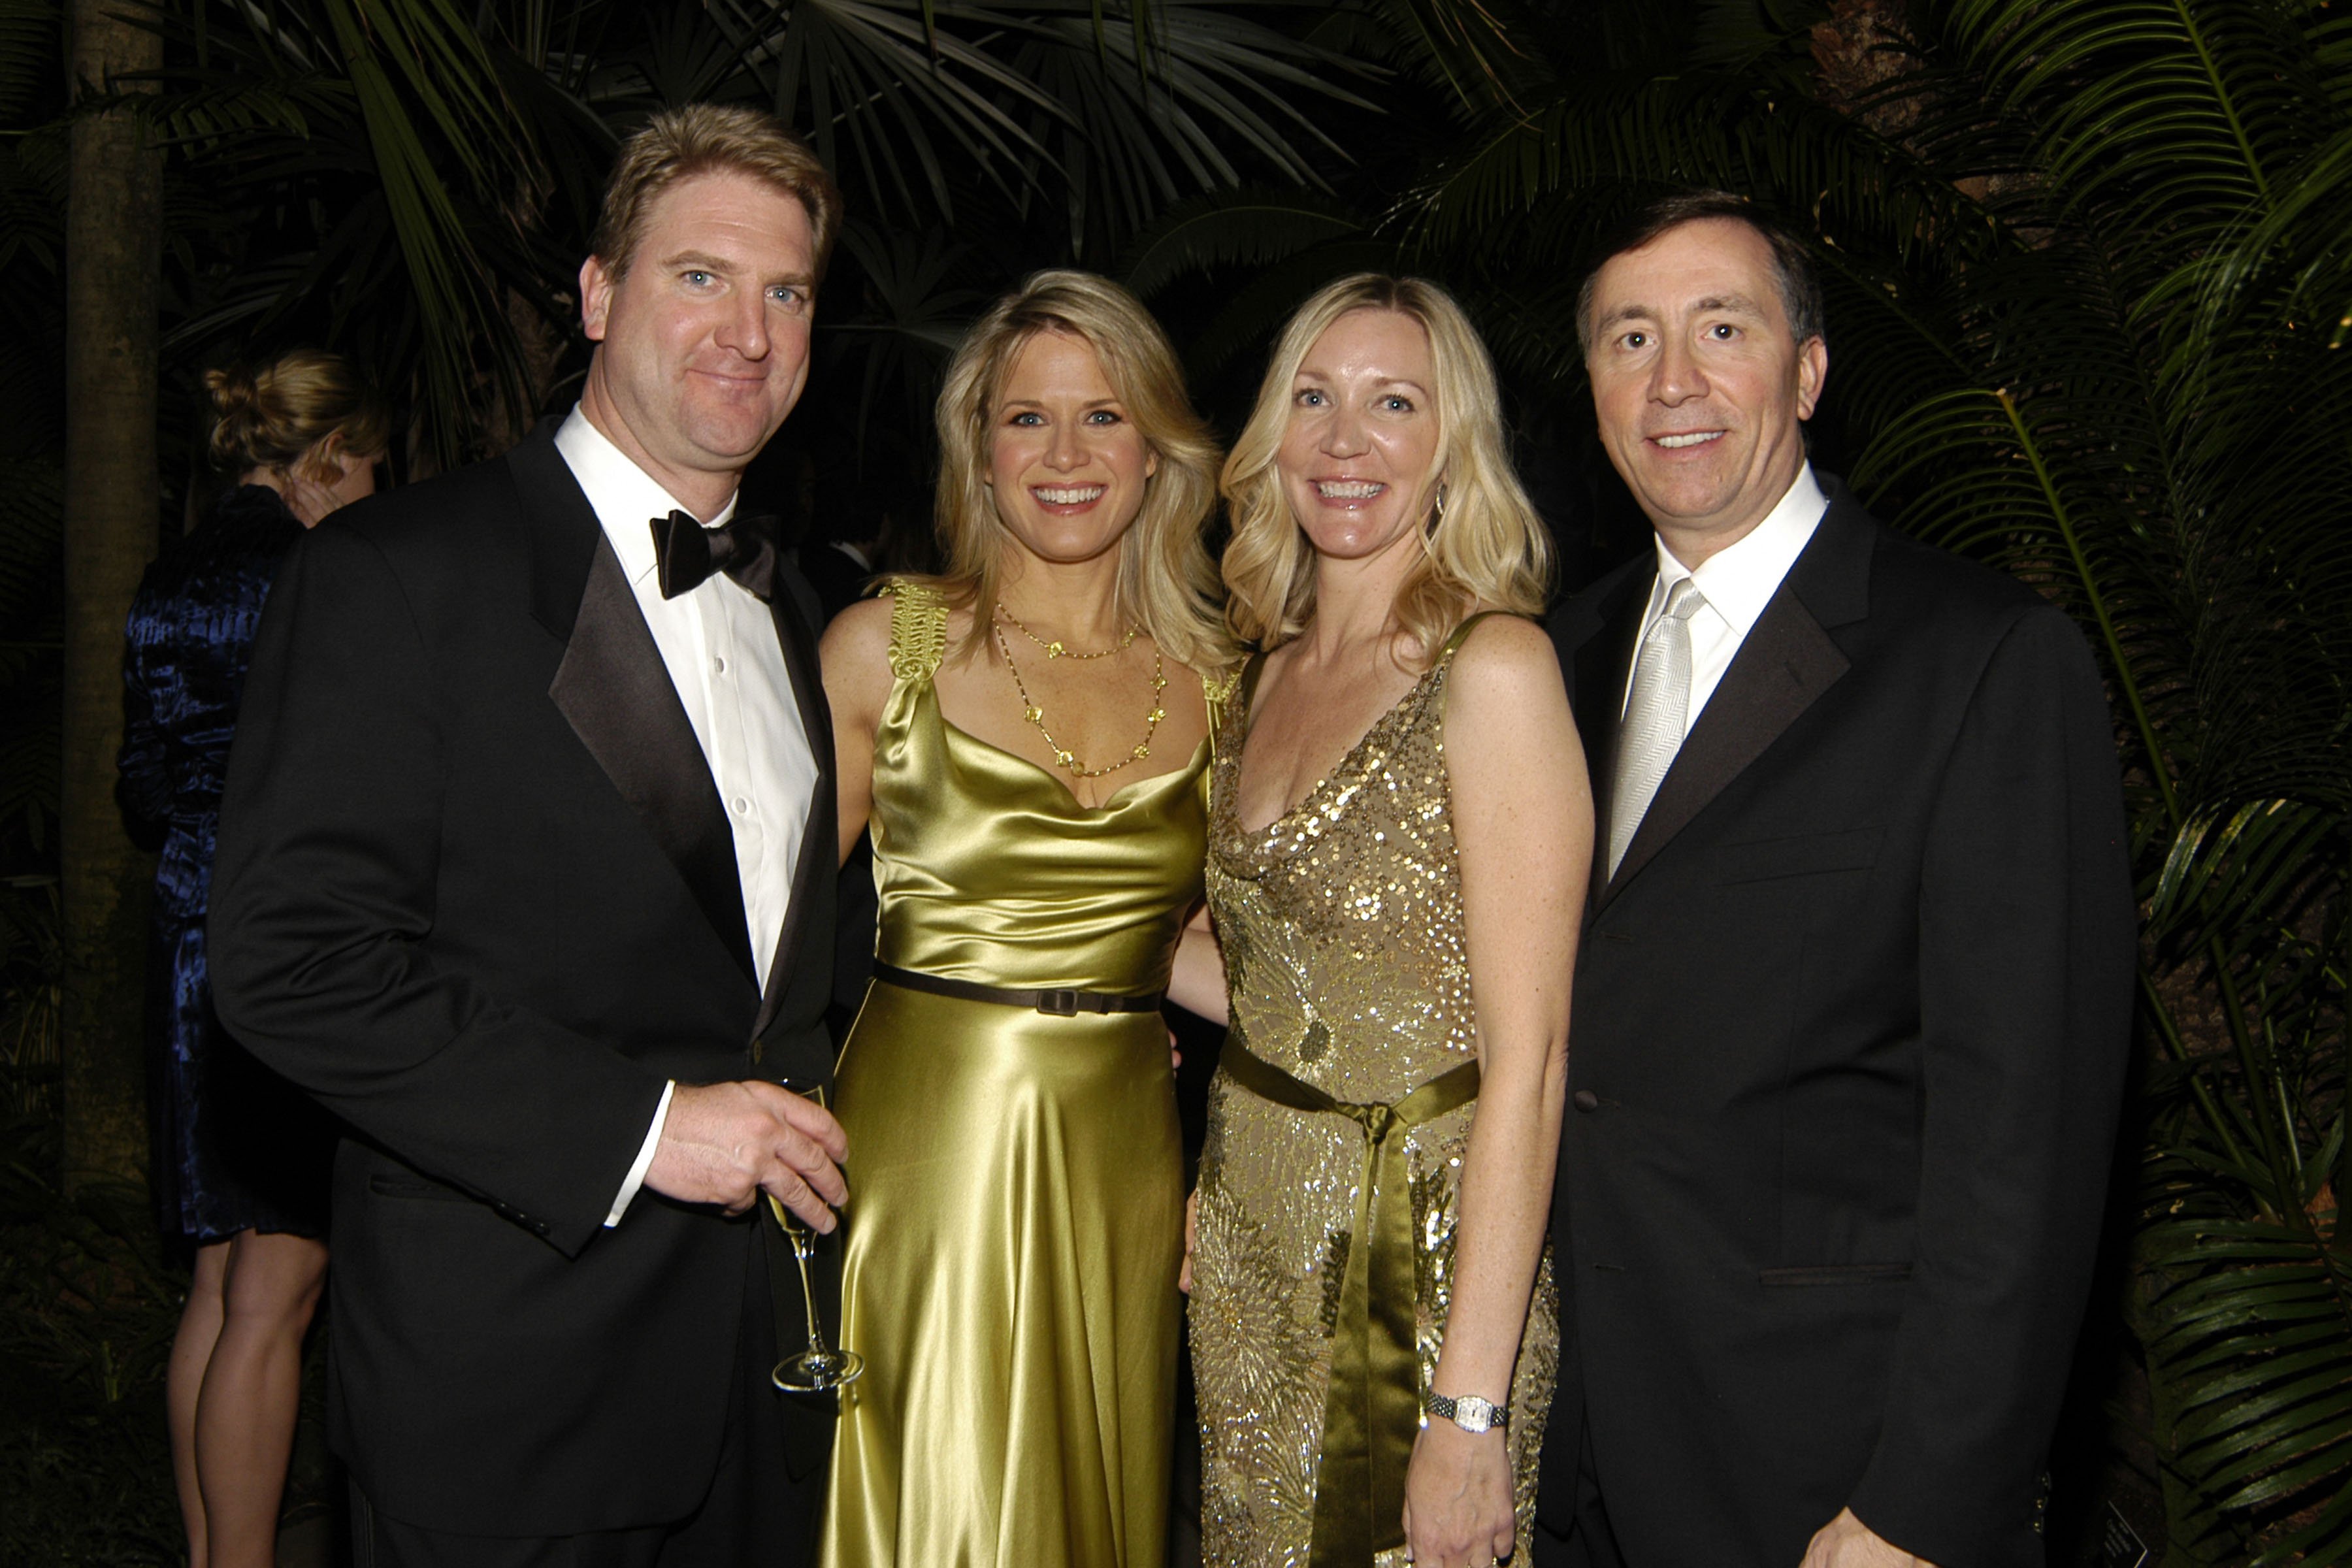 Daniel Gregory, Martha MacCallum, Kathleen DeParis and Lawrence DeParis during the New York Botanical Garden Winter Wonderland Ball at The NY Botanical Garden on December 7, 2007, in New York City. | Source: Getty Images